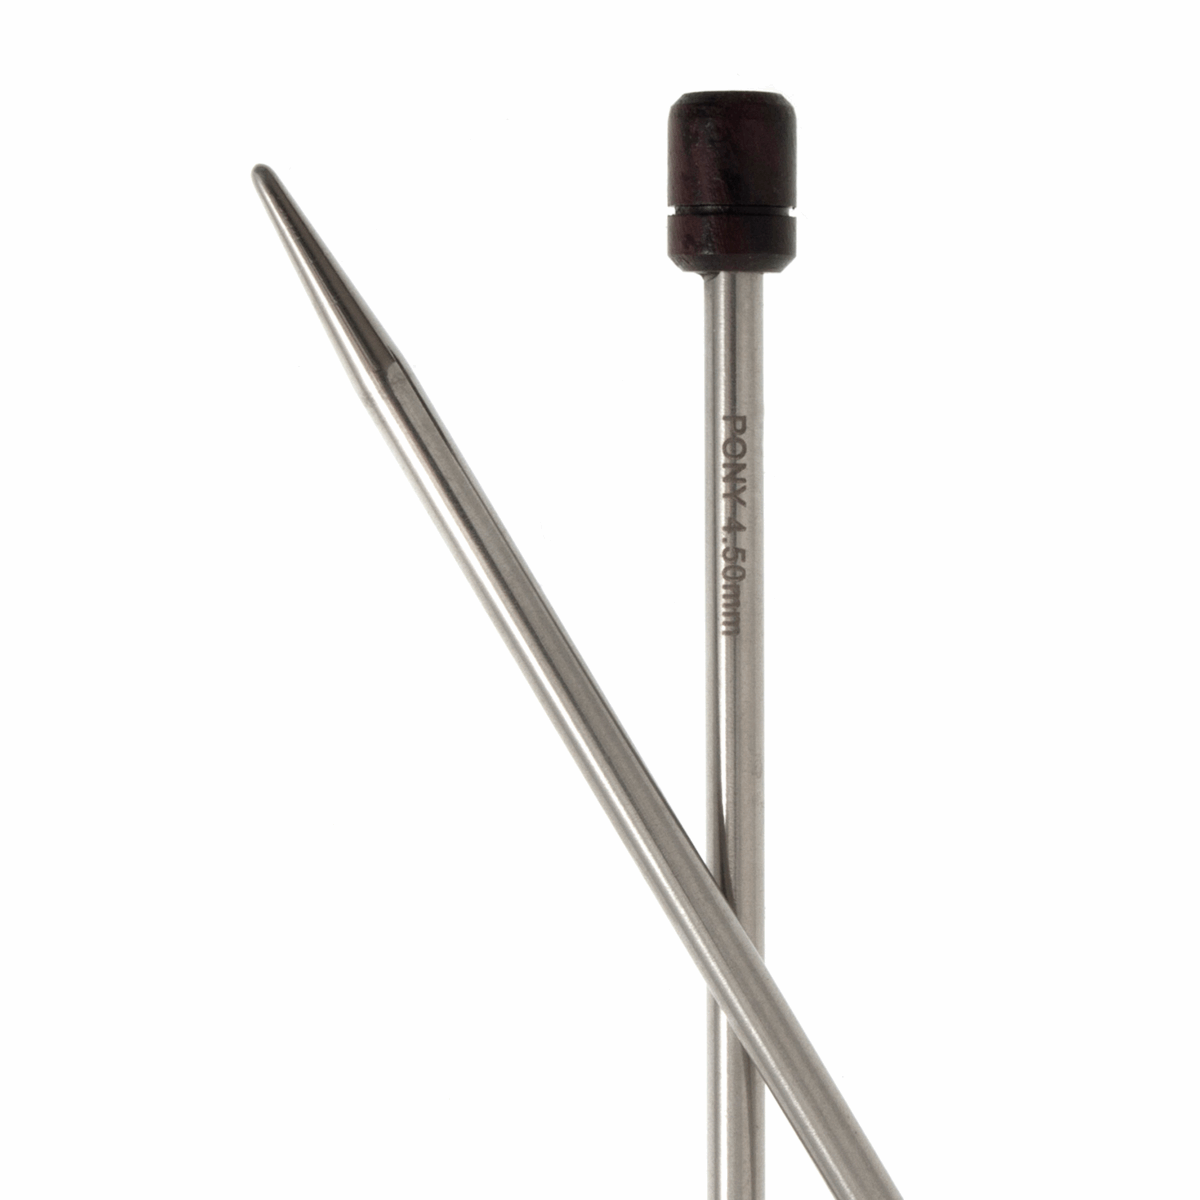 PONY 'Elan' Single-Ended Stainless Steel Knitting Pins with Rosewood Knob - 35cm x 4.50mm